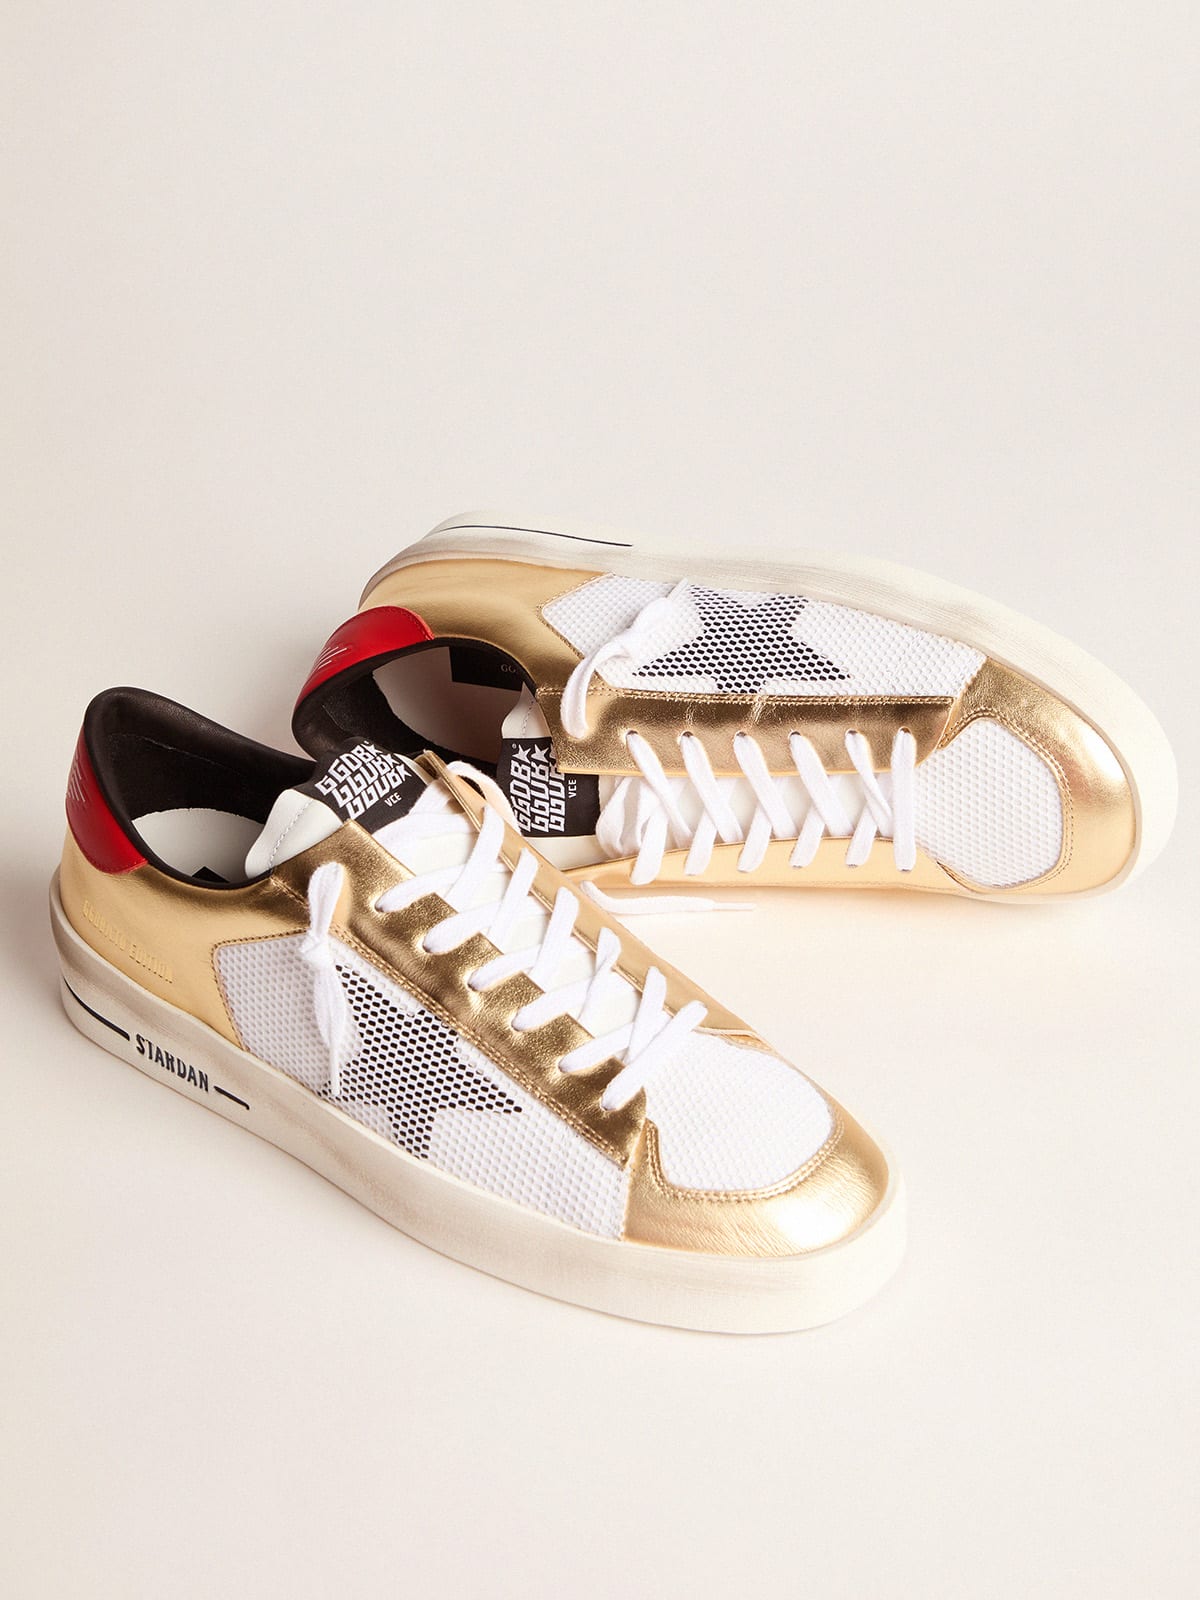 Women\'s Limited Edition Stardan sneakers with gold inserts | Golden Goose